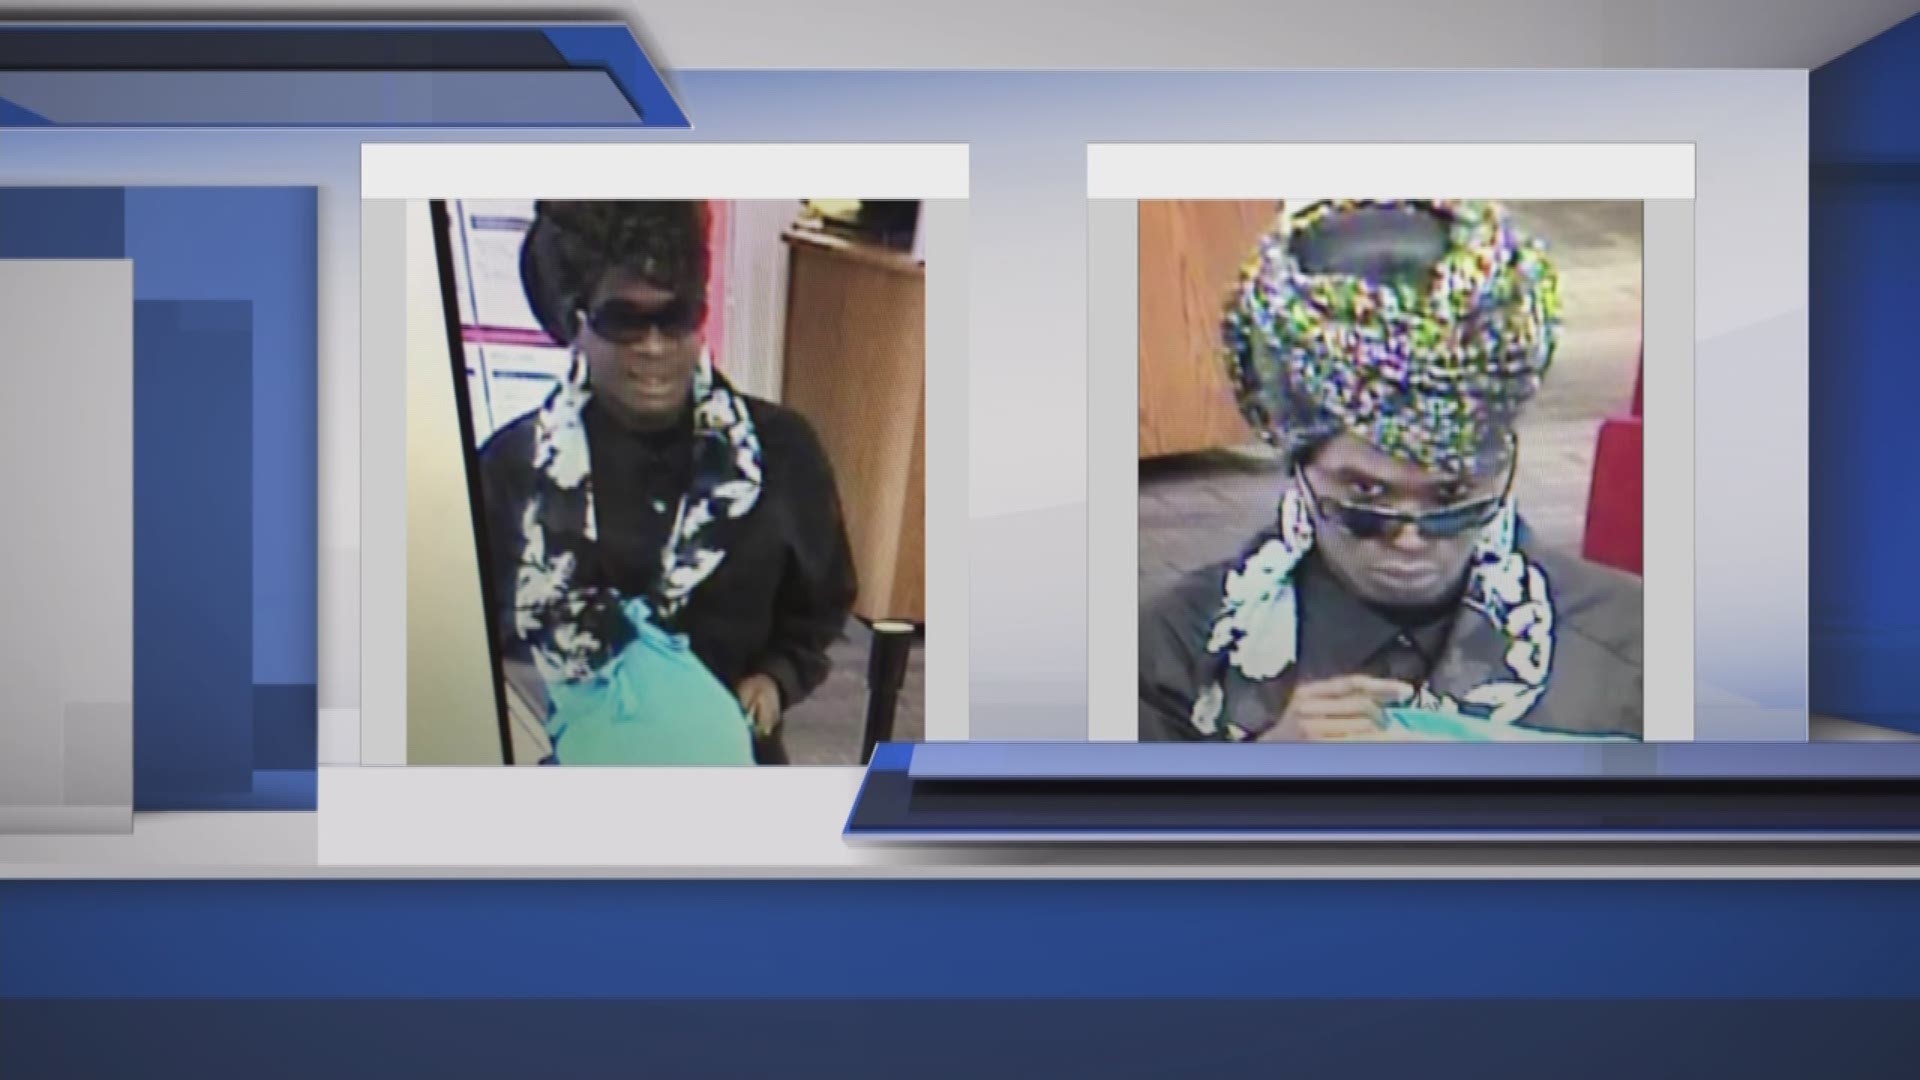 Lexington Police have identified the man who they say wore a dress to rob a bank. Officers say the person they're looking for is 25-year-old J'Neil Jacoby Jacobs.